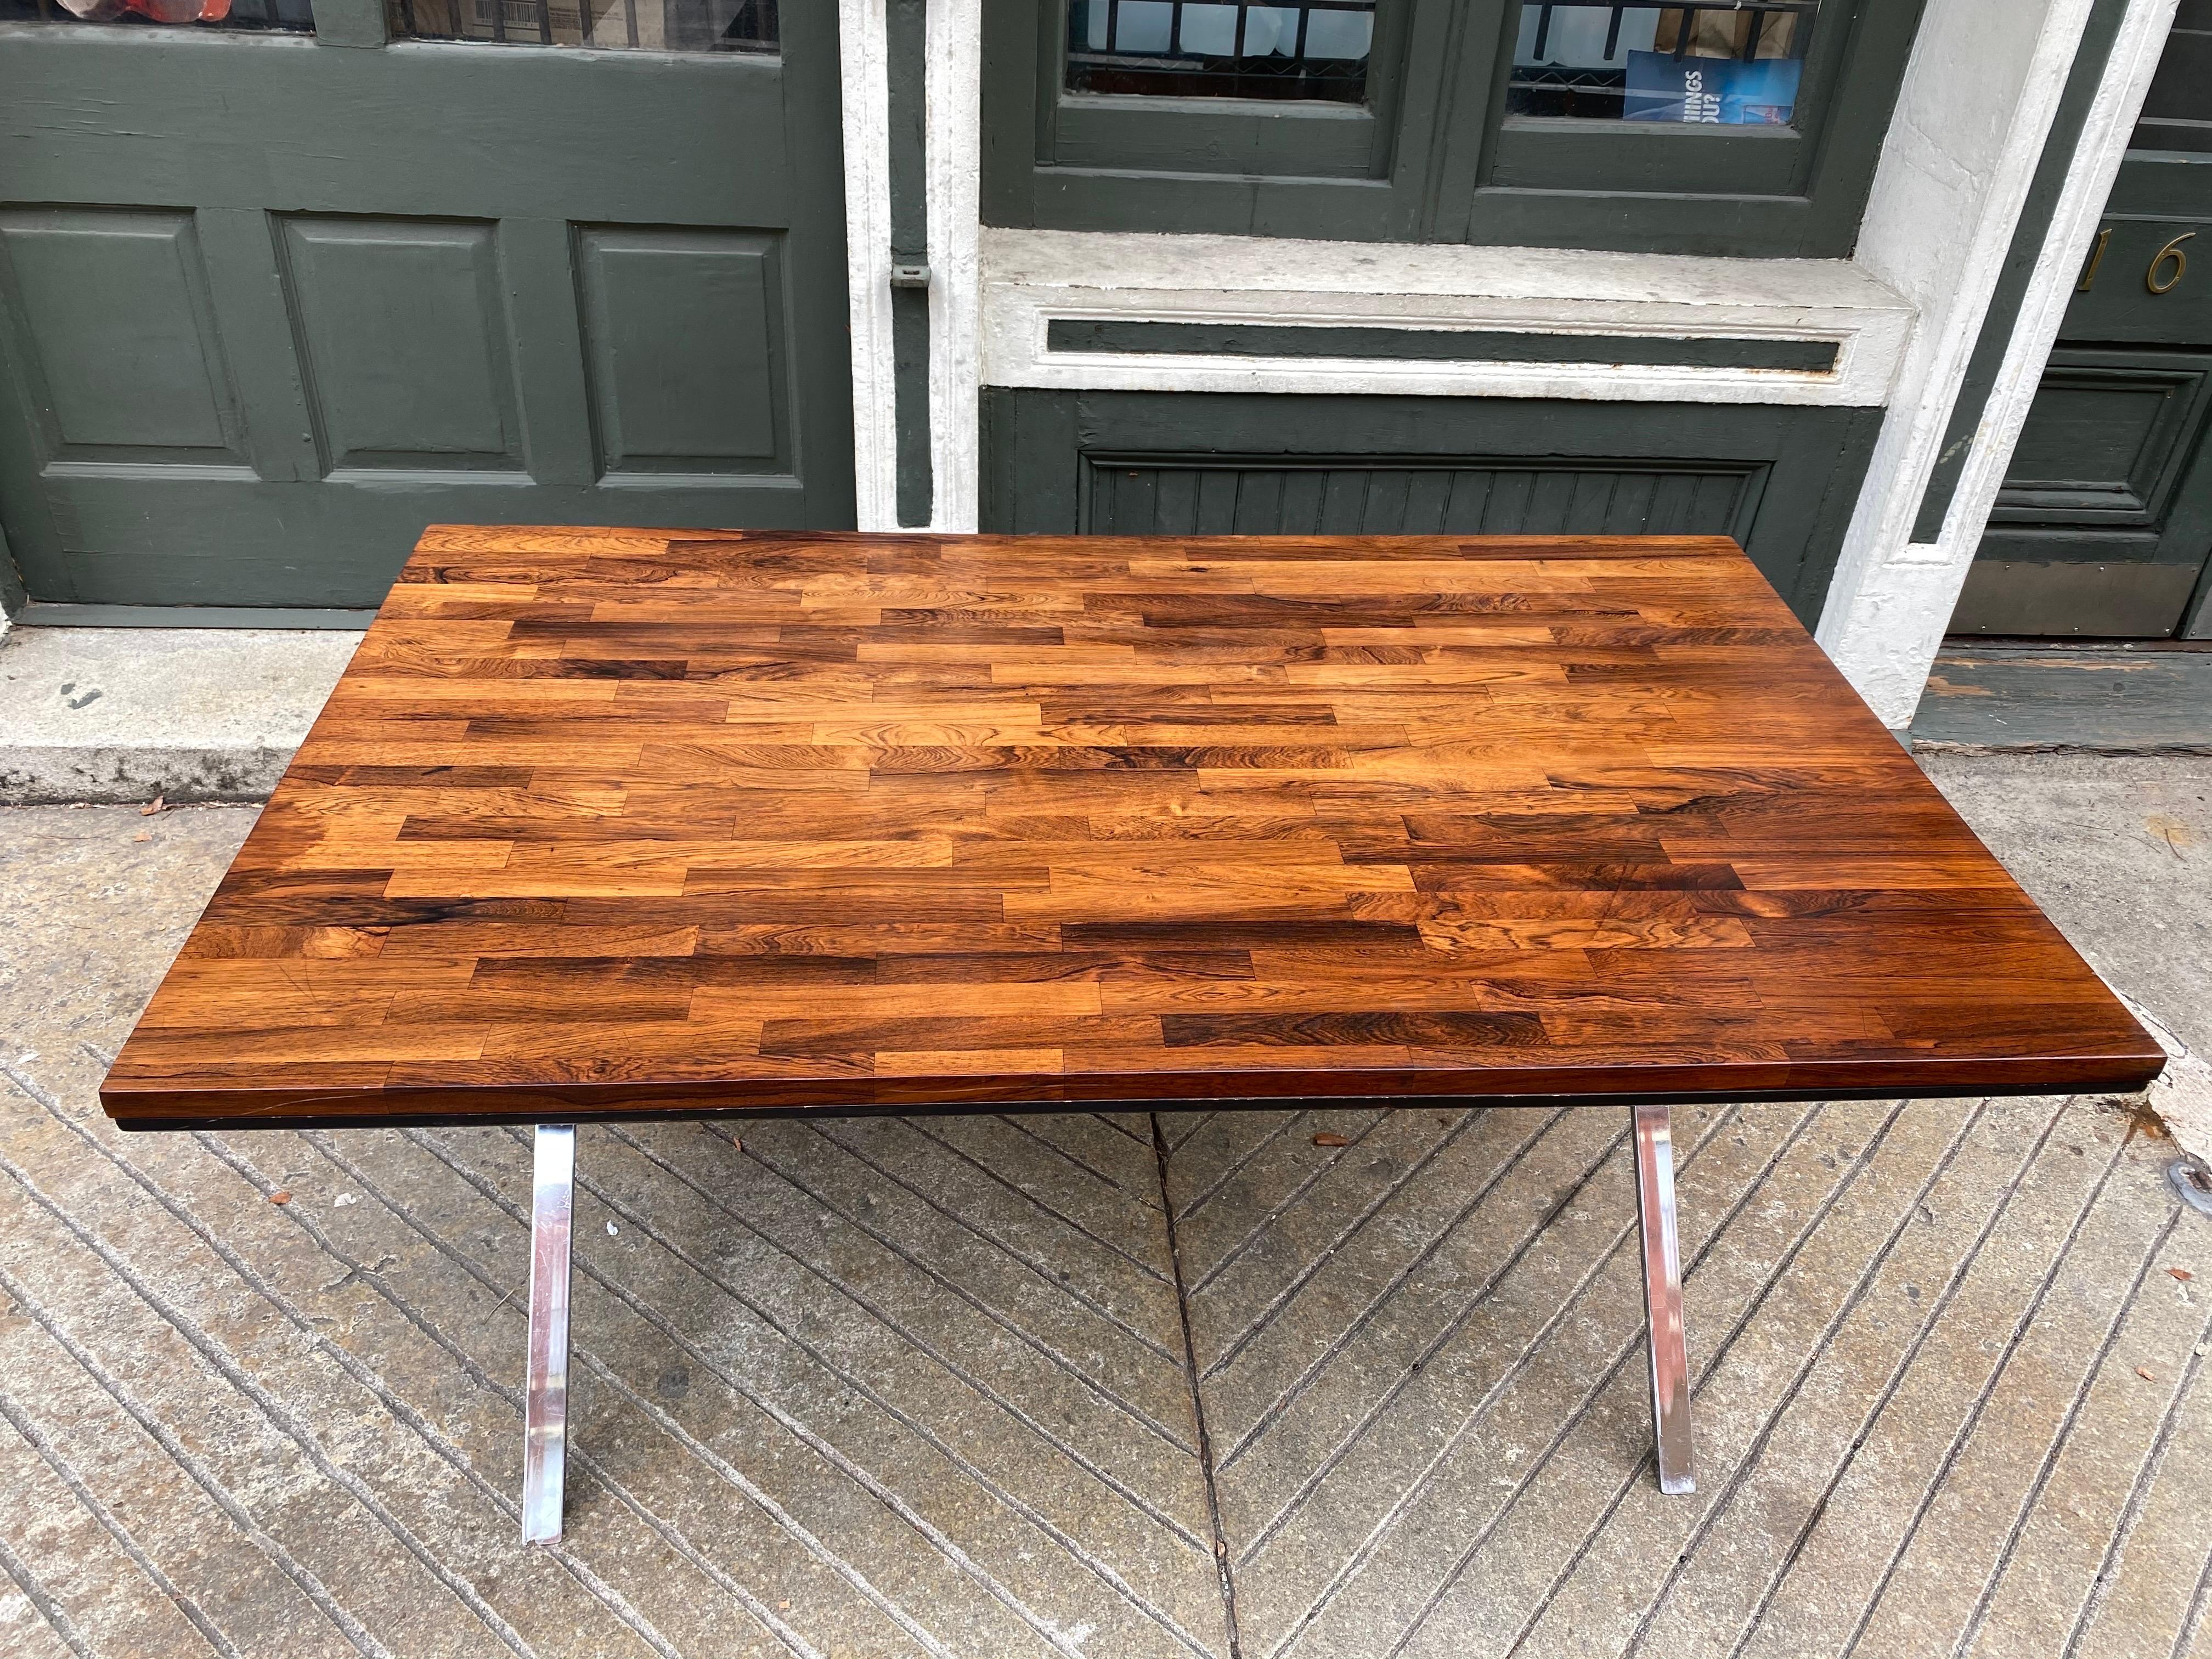 Founders solid rosewood table with chrome X-base. Solid blocks of rosewood forms the top much like a butcher block table is produced. Often attributed to Milo Baughman, because of the chrome base. Great size to use for dining table, desk or small